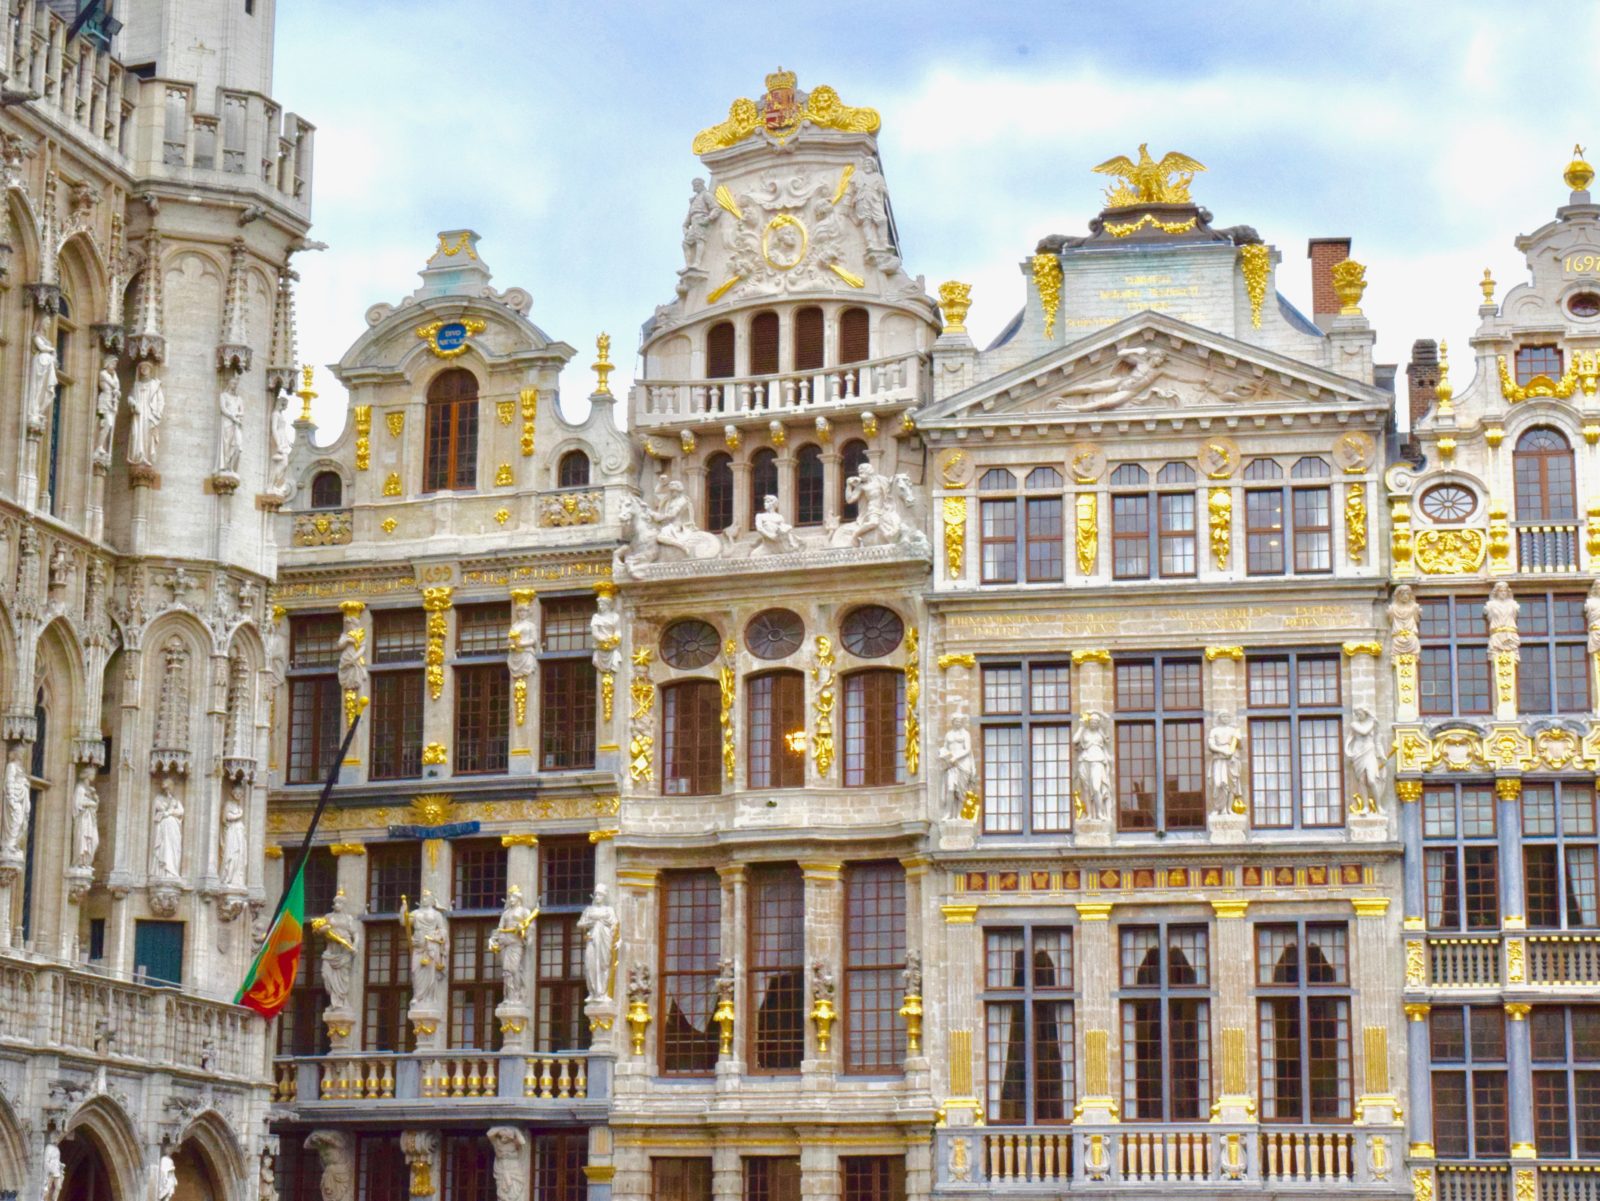 Grand Palace in Brussels